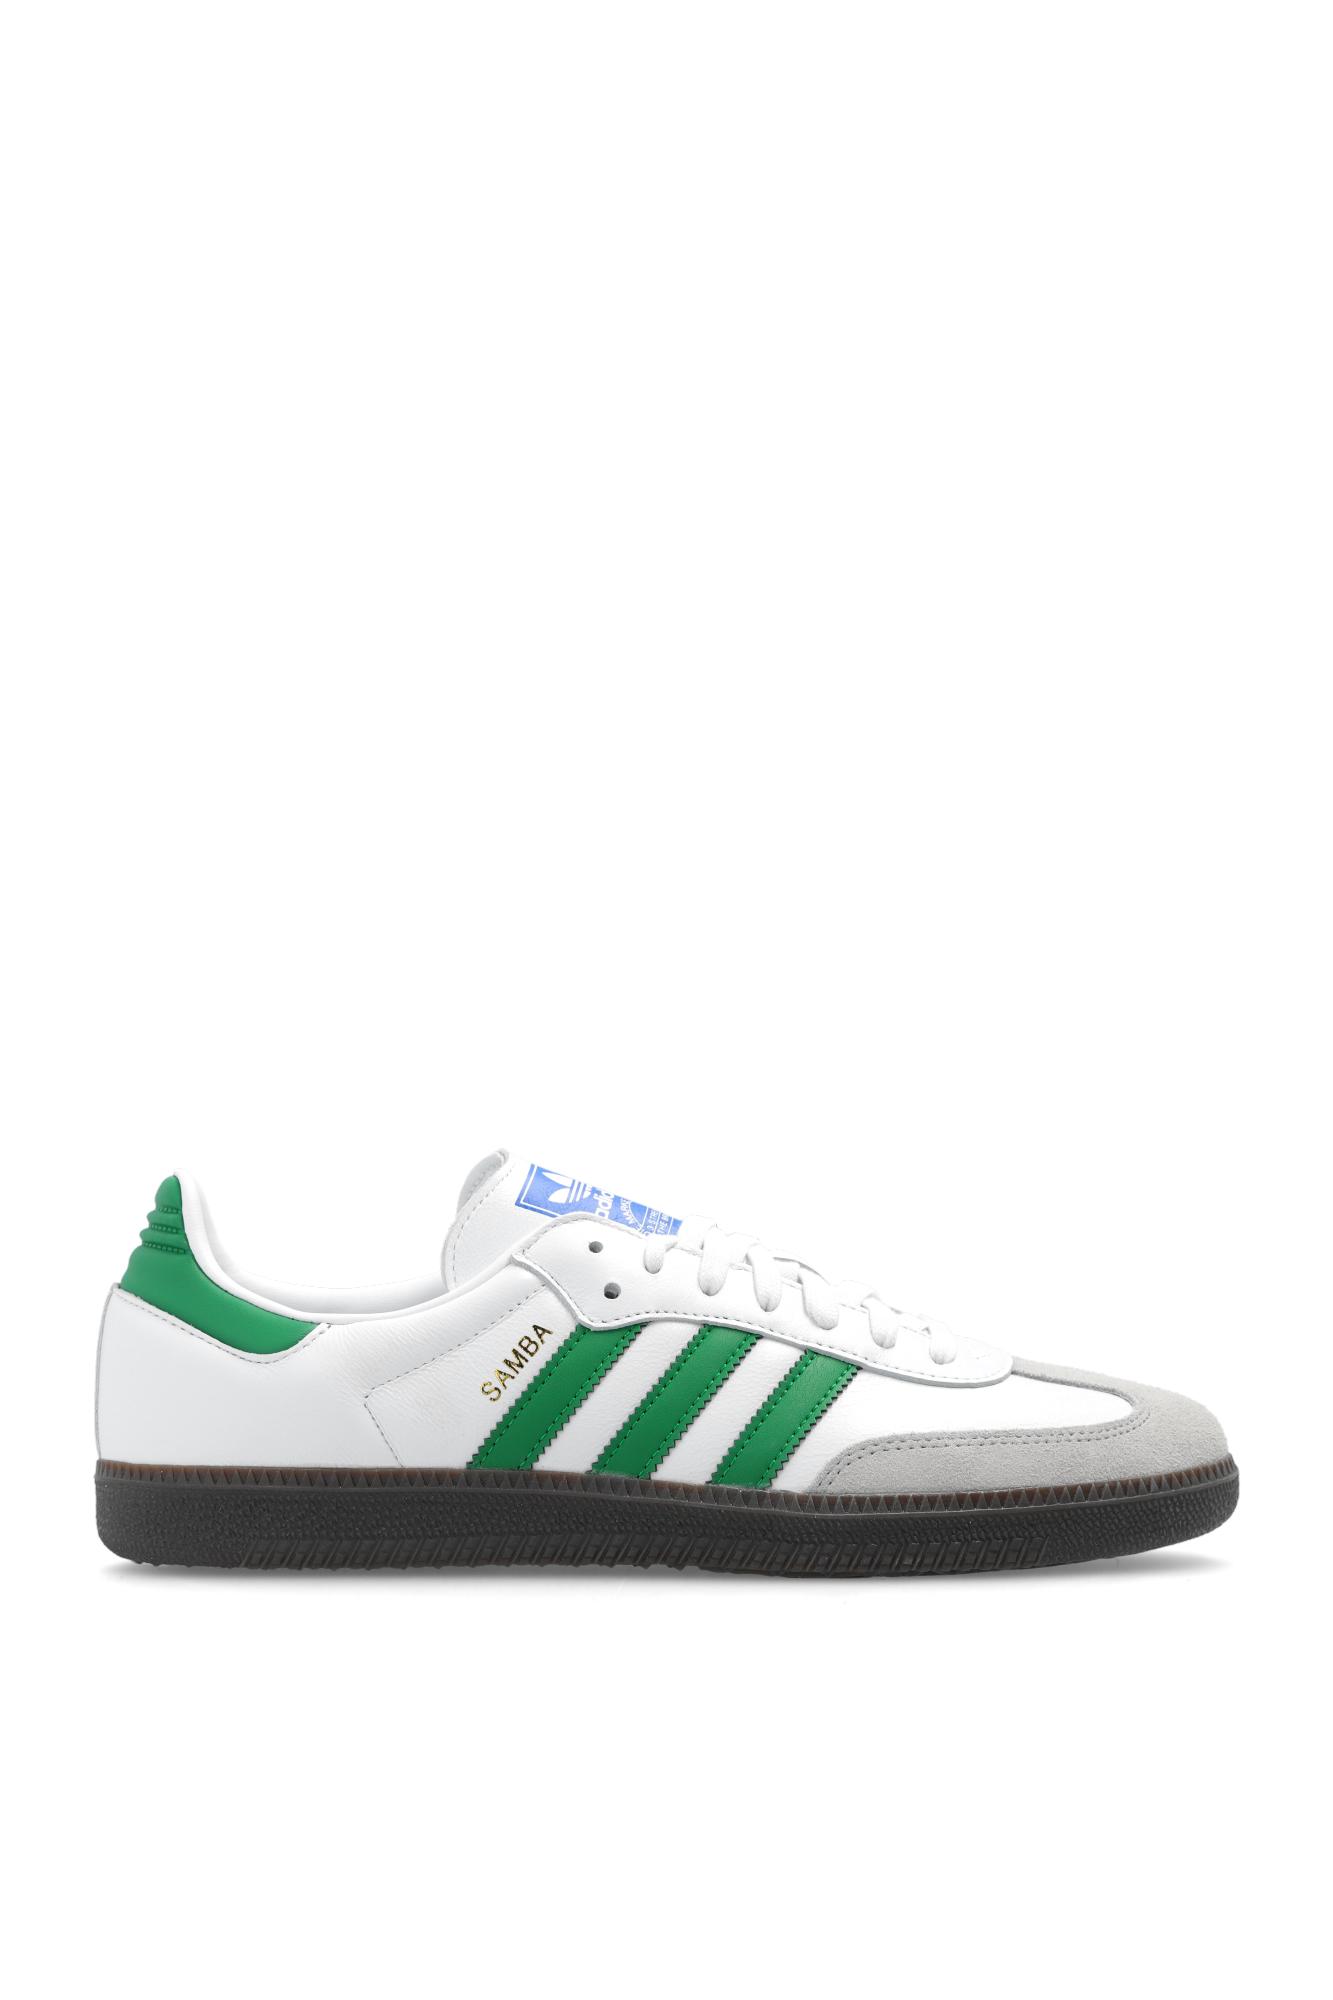 adidas Originals White And Green Samba Og Trainers for Men | Lyst